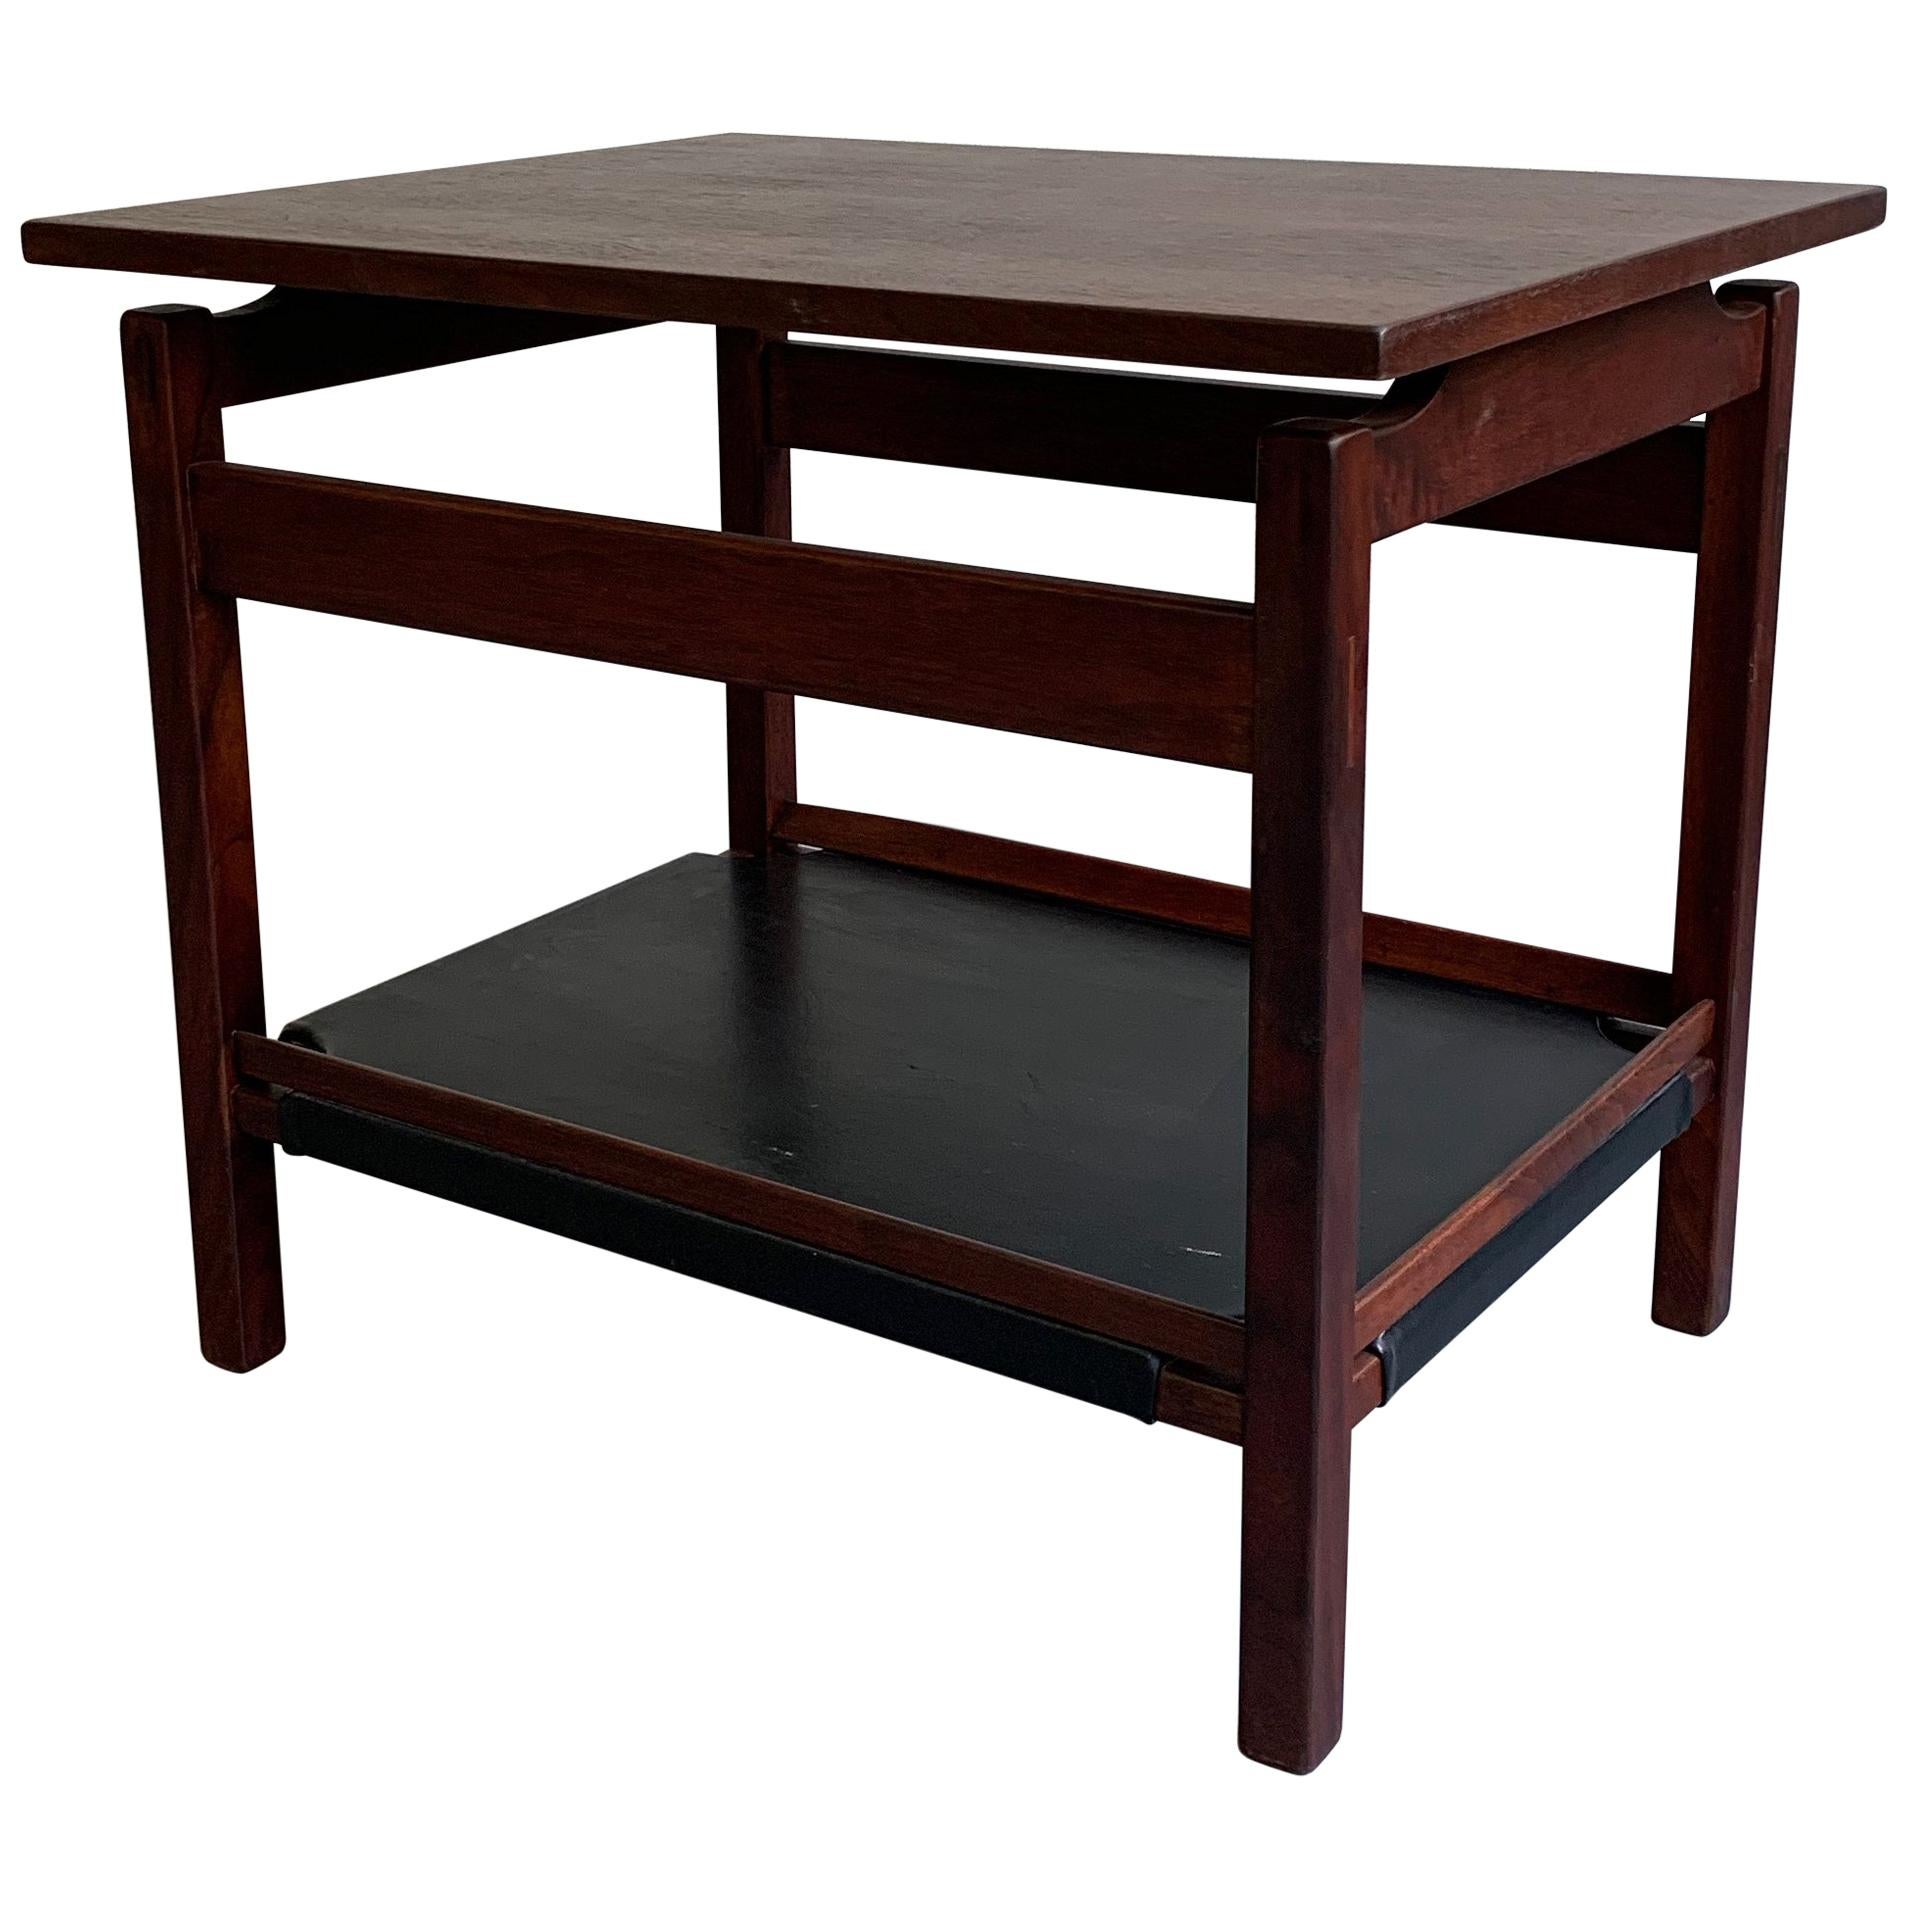 Danish Modern Teak and Leather Side Table